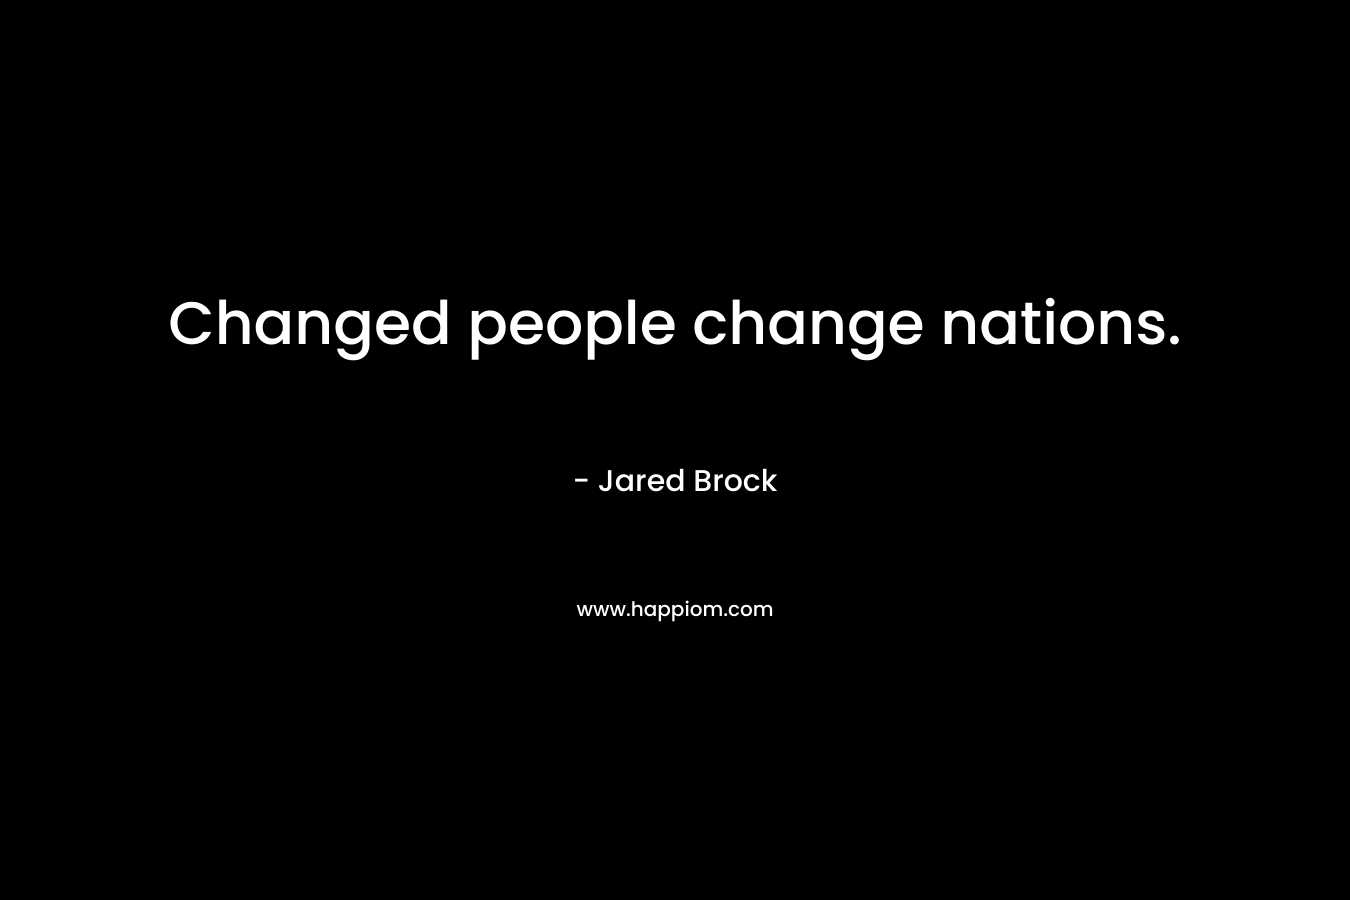 Changed people change nations.